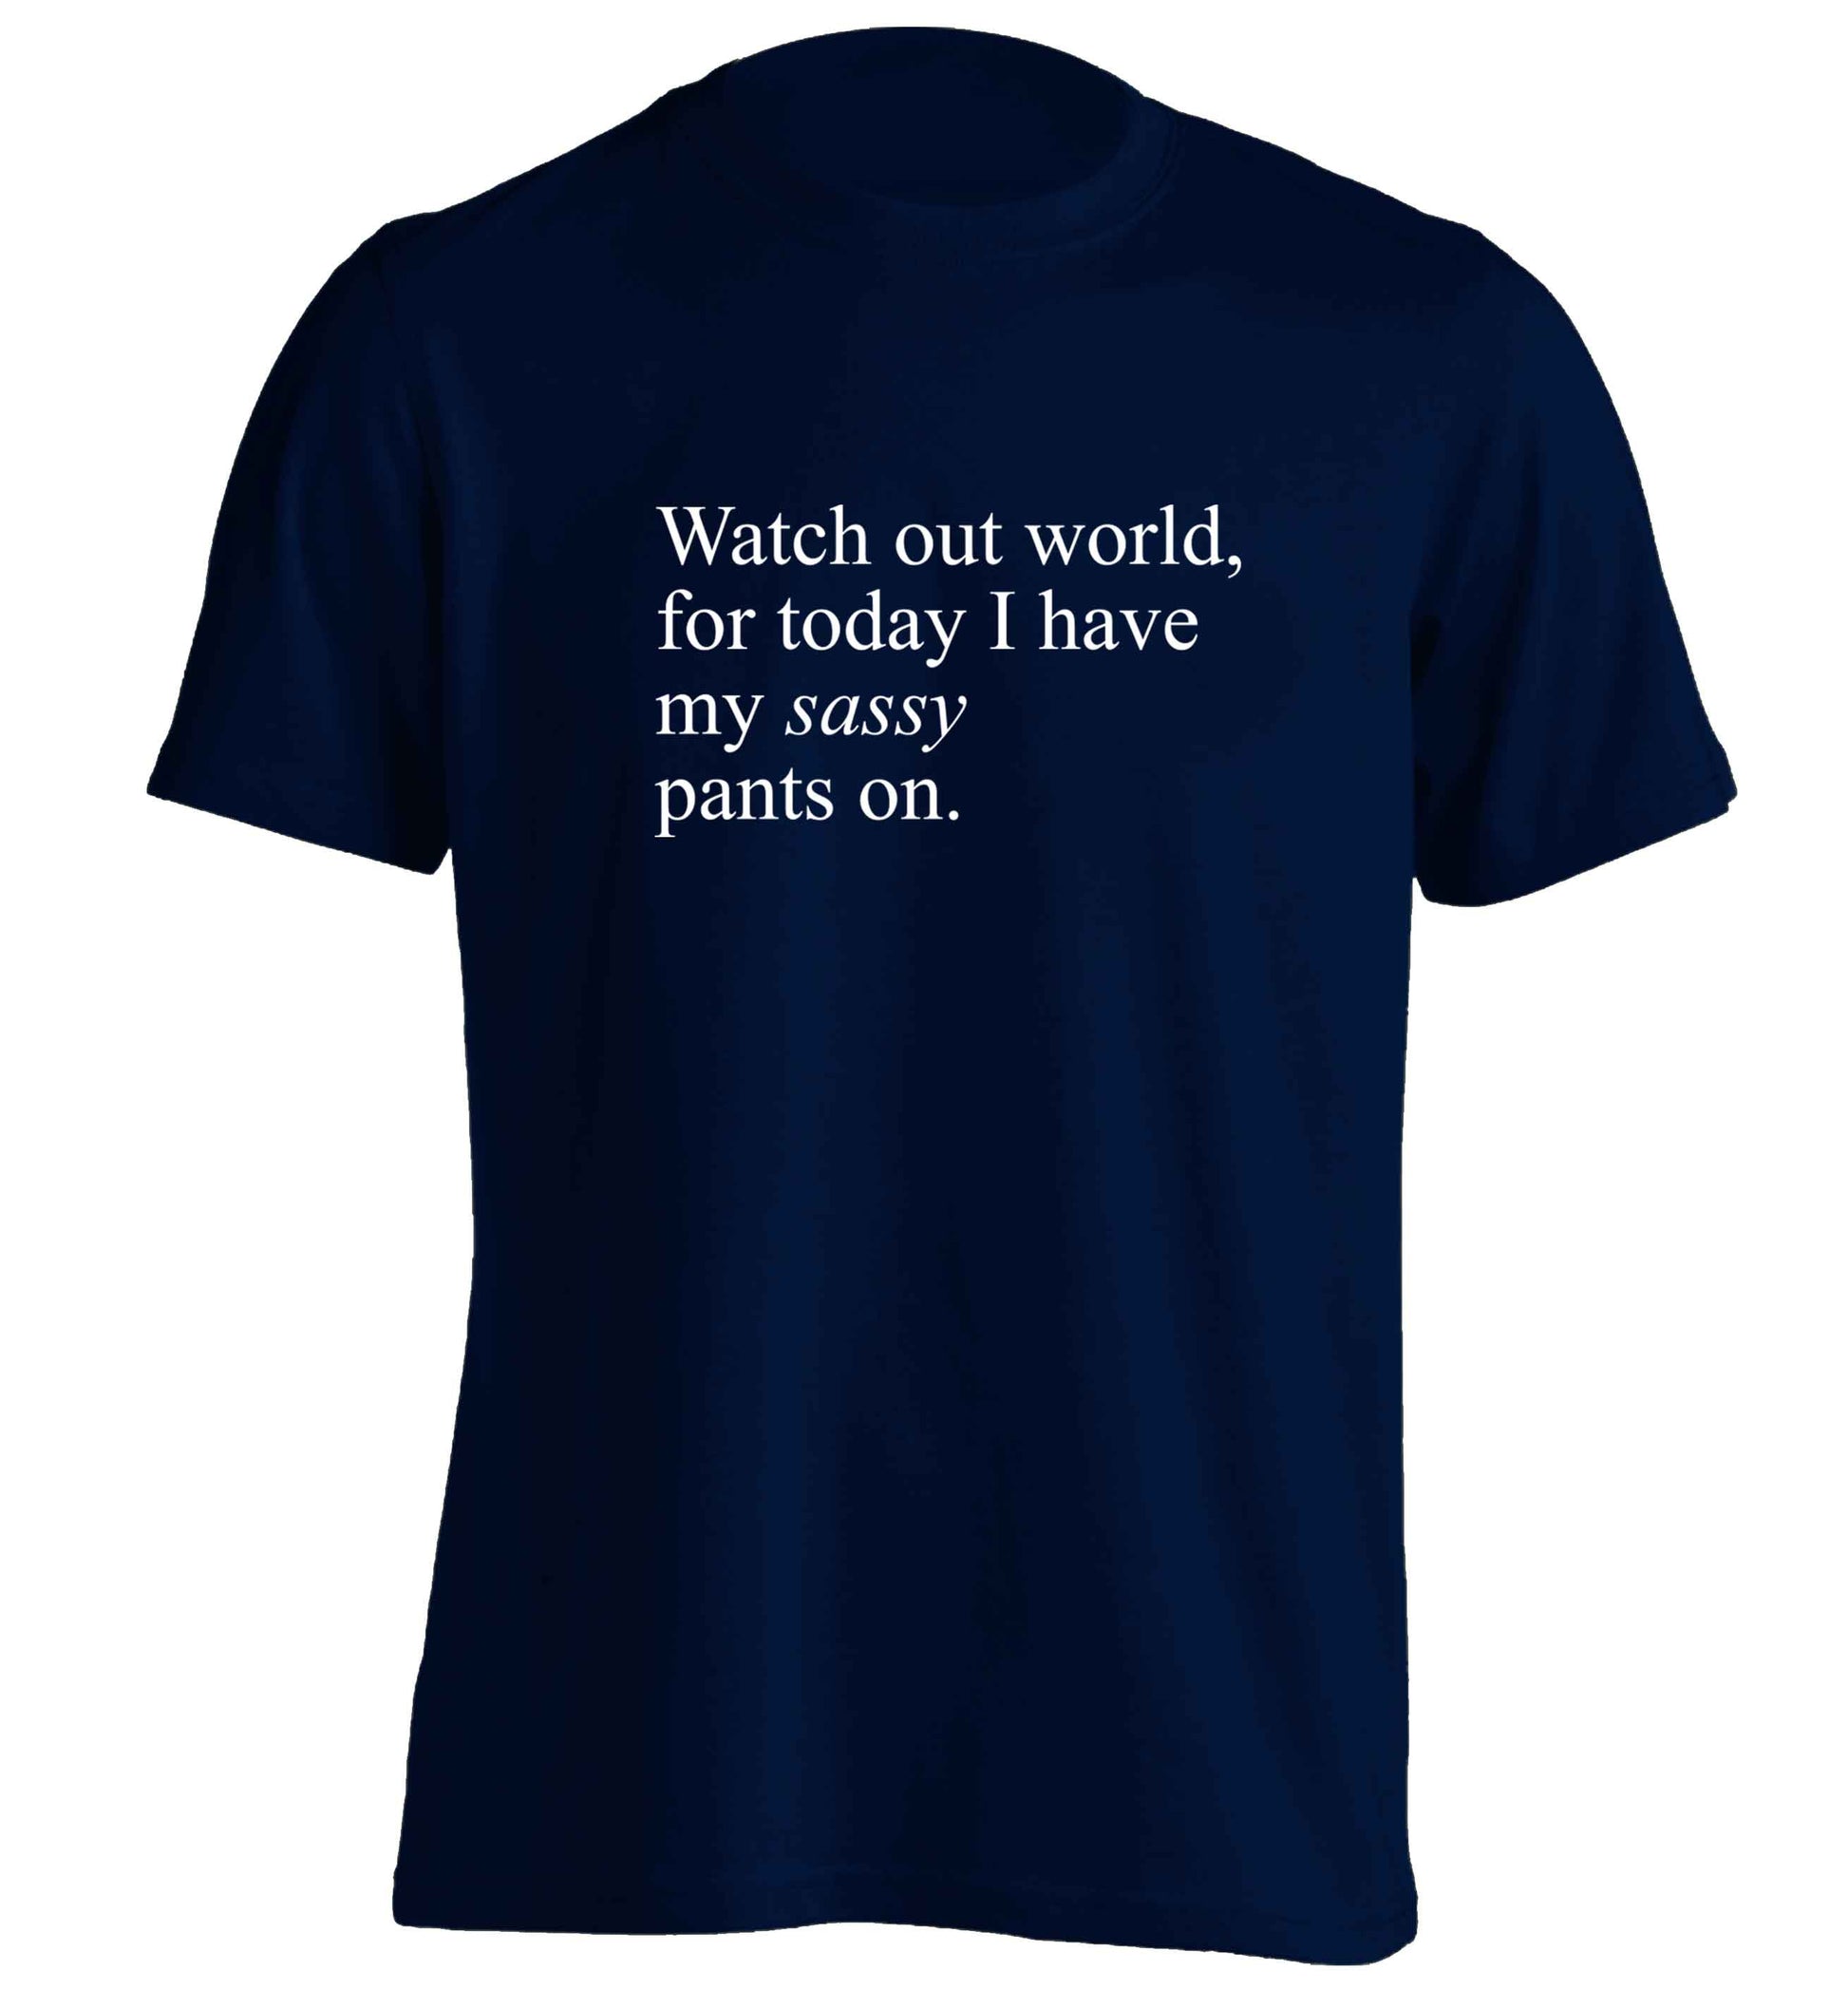 Watch out world for today I have my sassy pants on adults unisex navy Tshirt 2XL